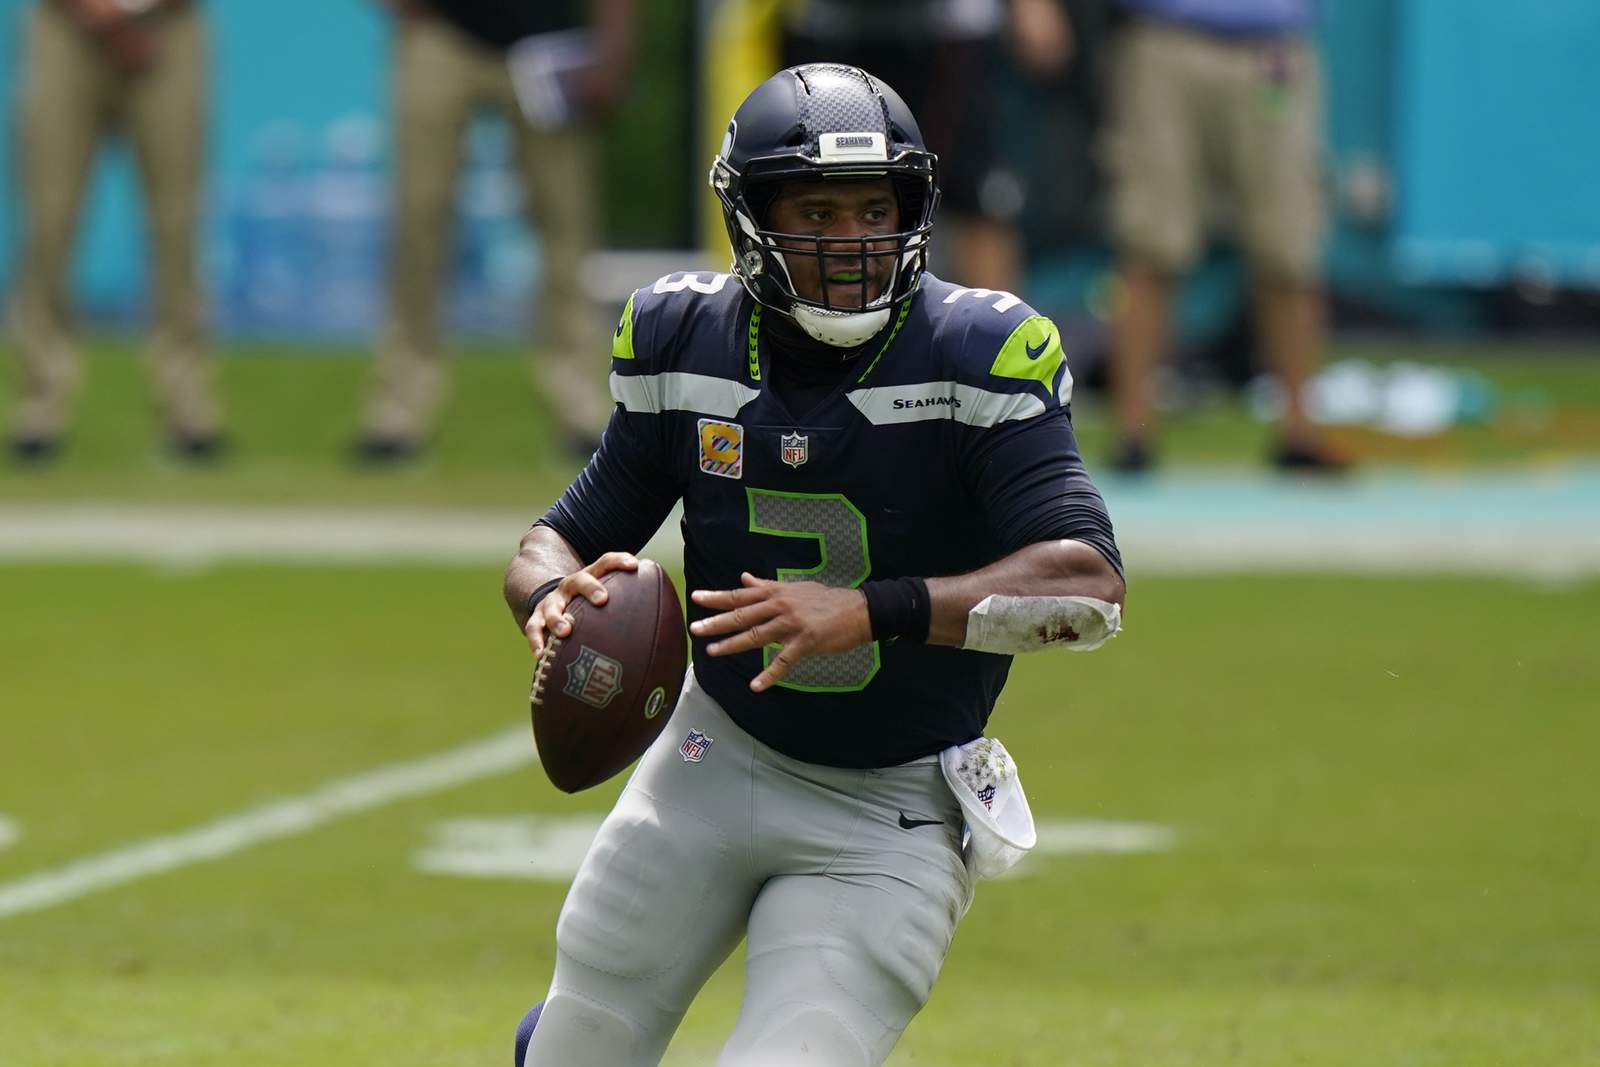 Dolphins comeback falls short as Wilson leads Seahawks to first 4-0 start since 2013